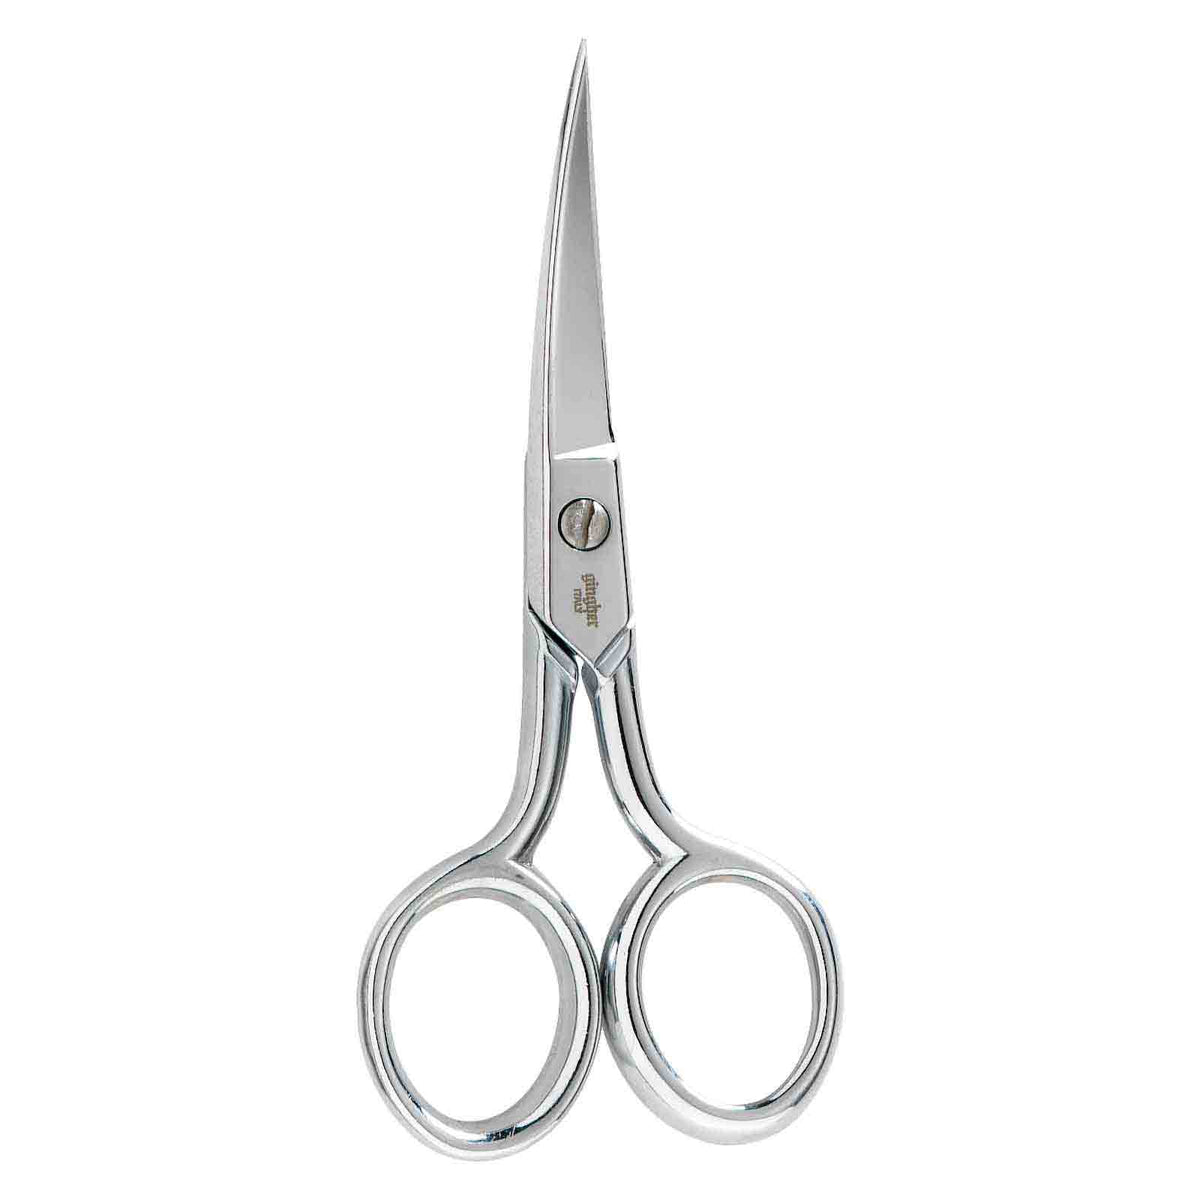 Double Curved Embroidery Scissors 6